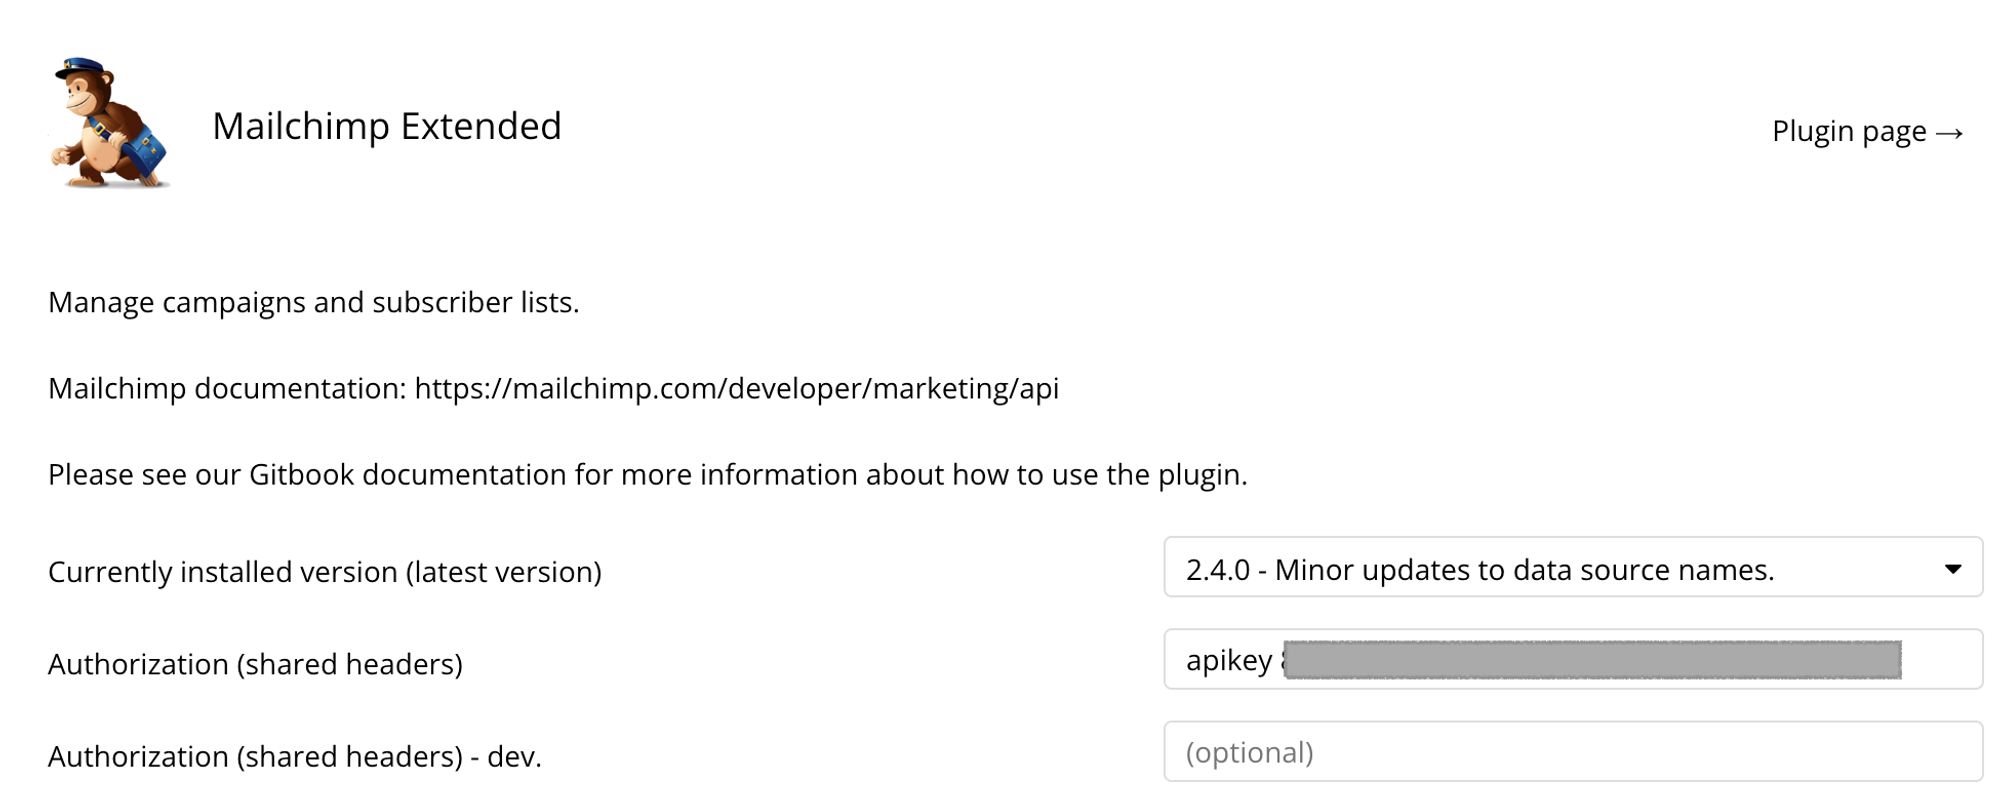 Make sure you add apikey and a space before pasting in your API key.